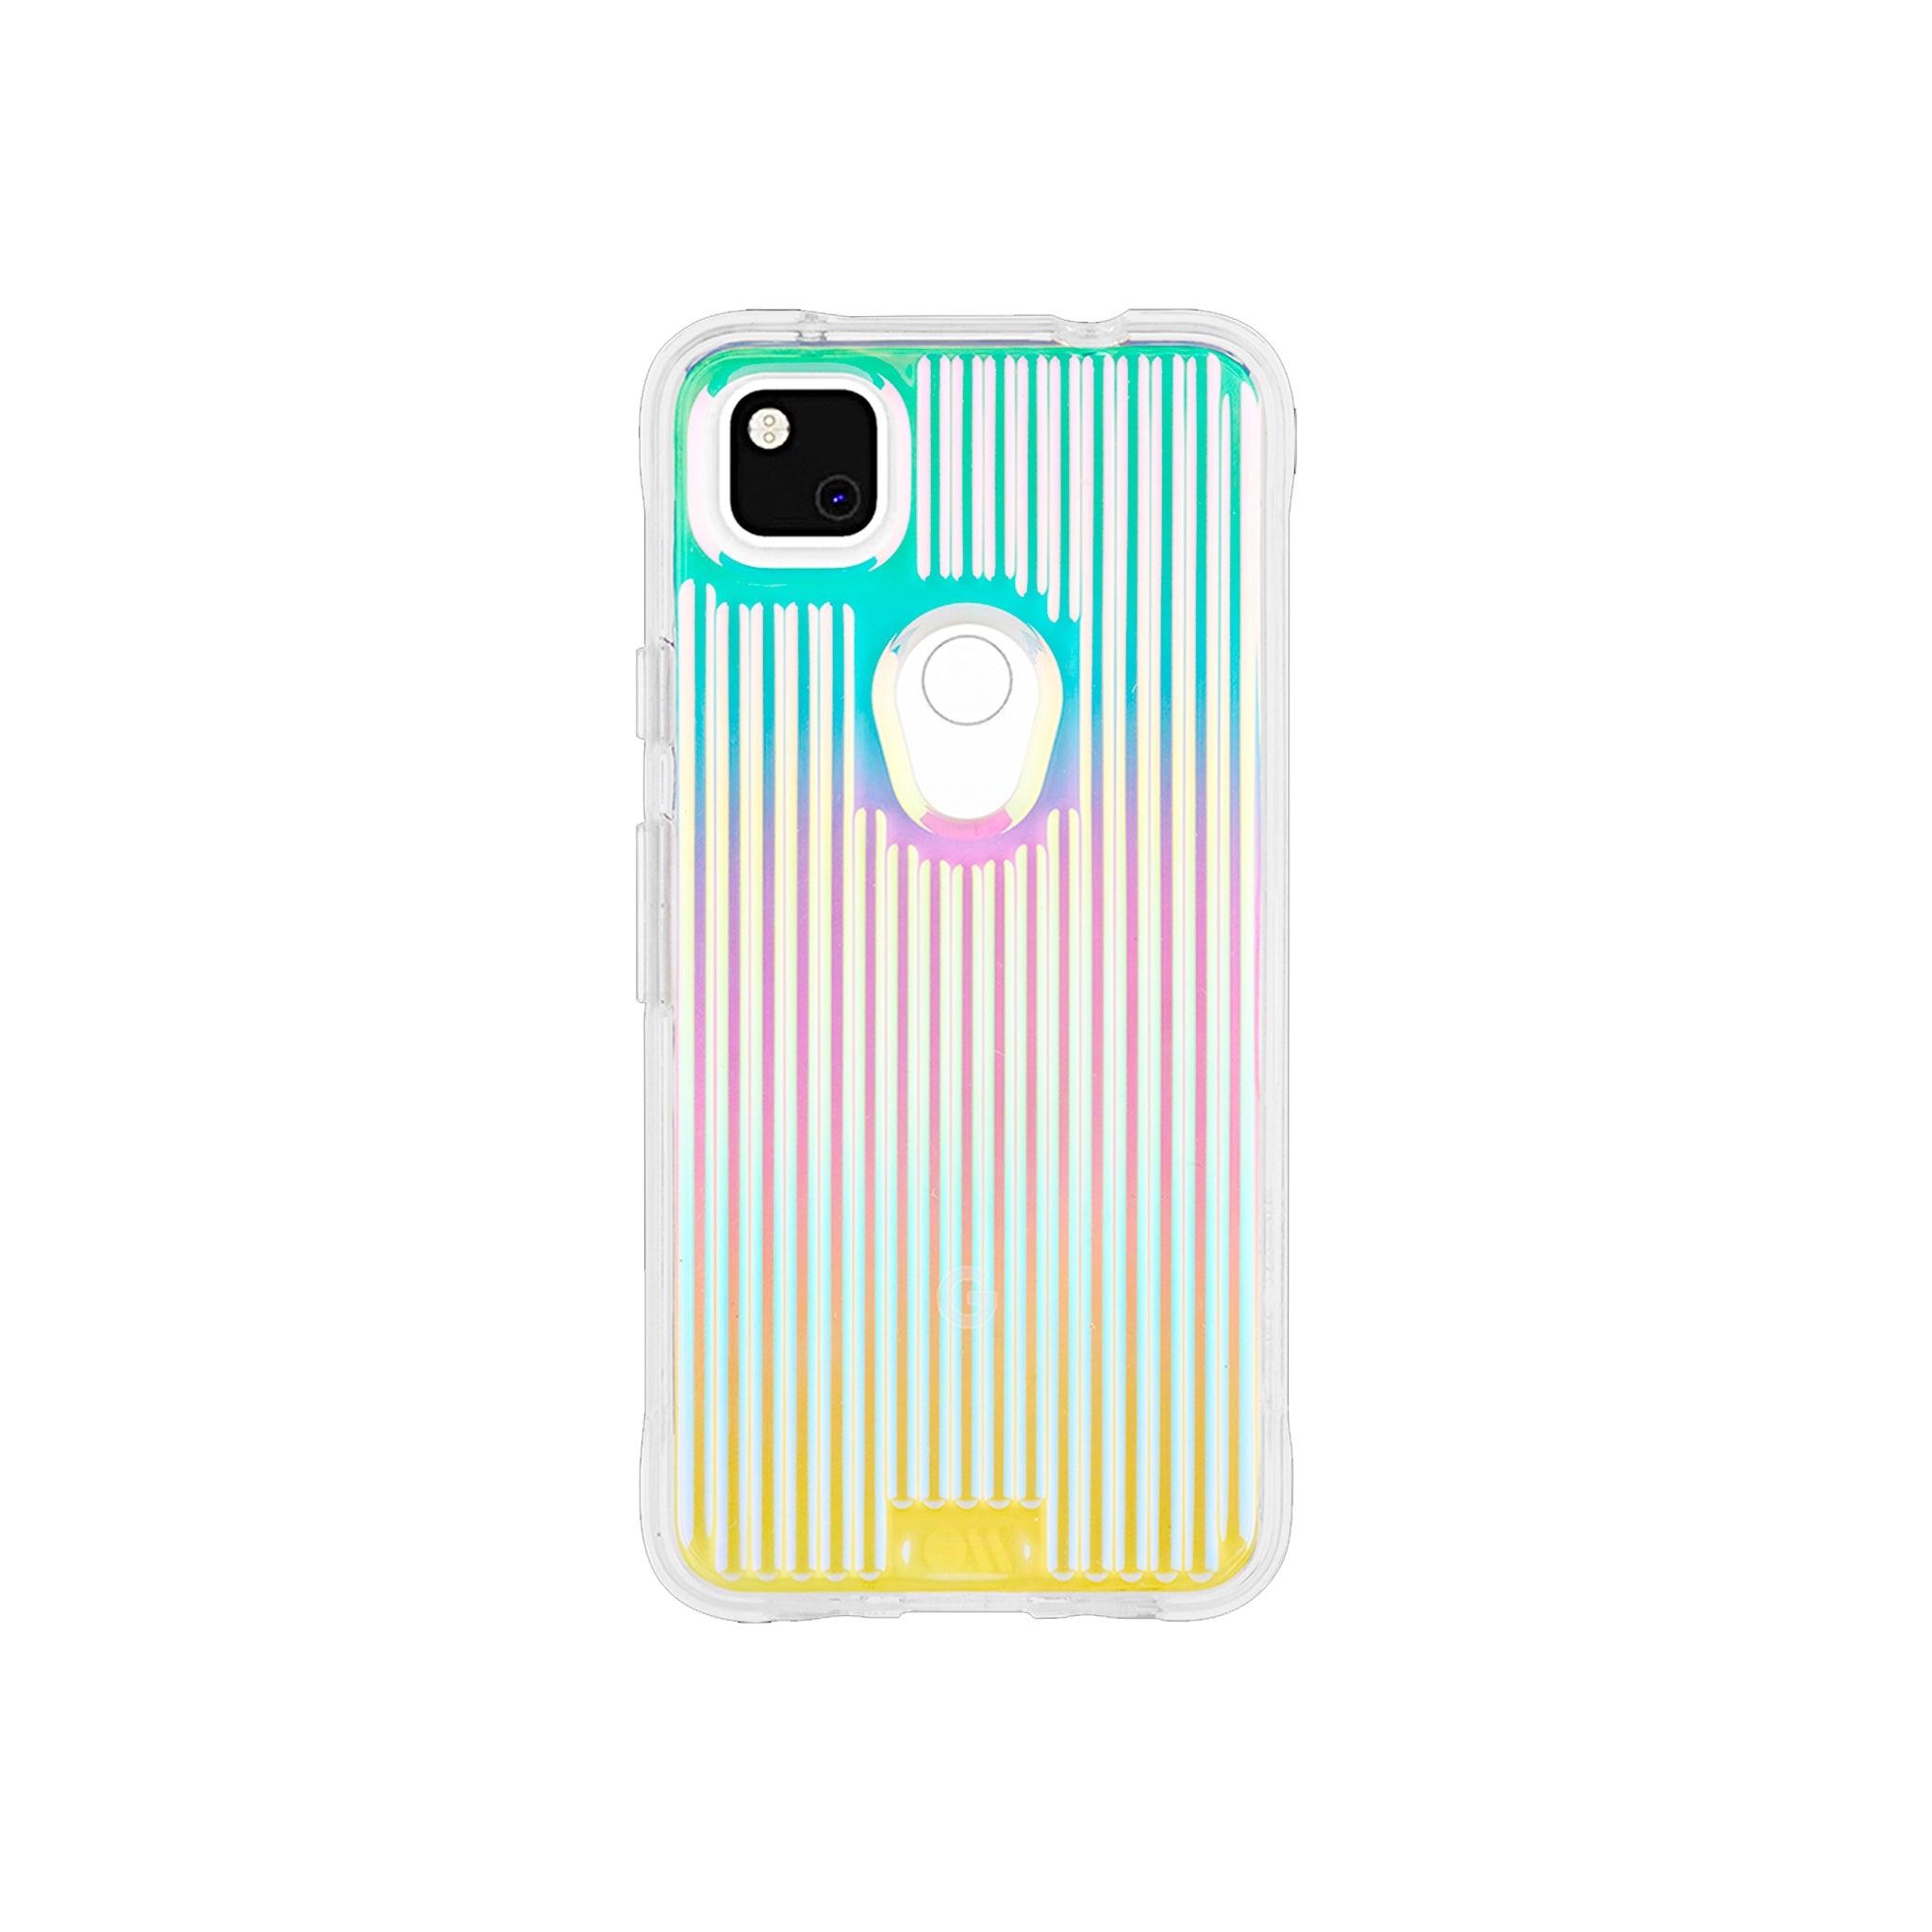 Case-mate - Tough Groove Case For Google Pixel 4a - Iridescent